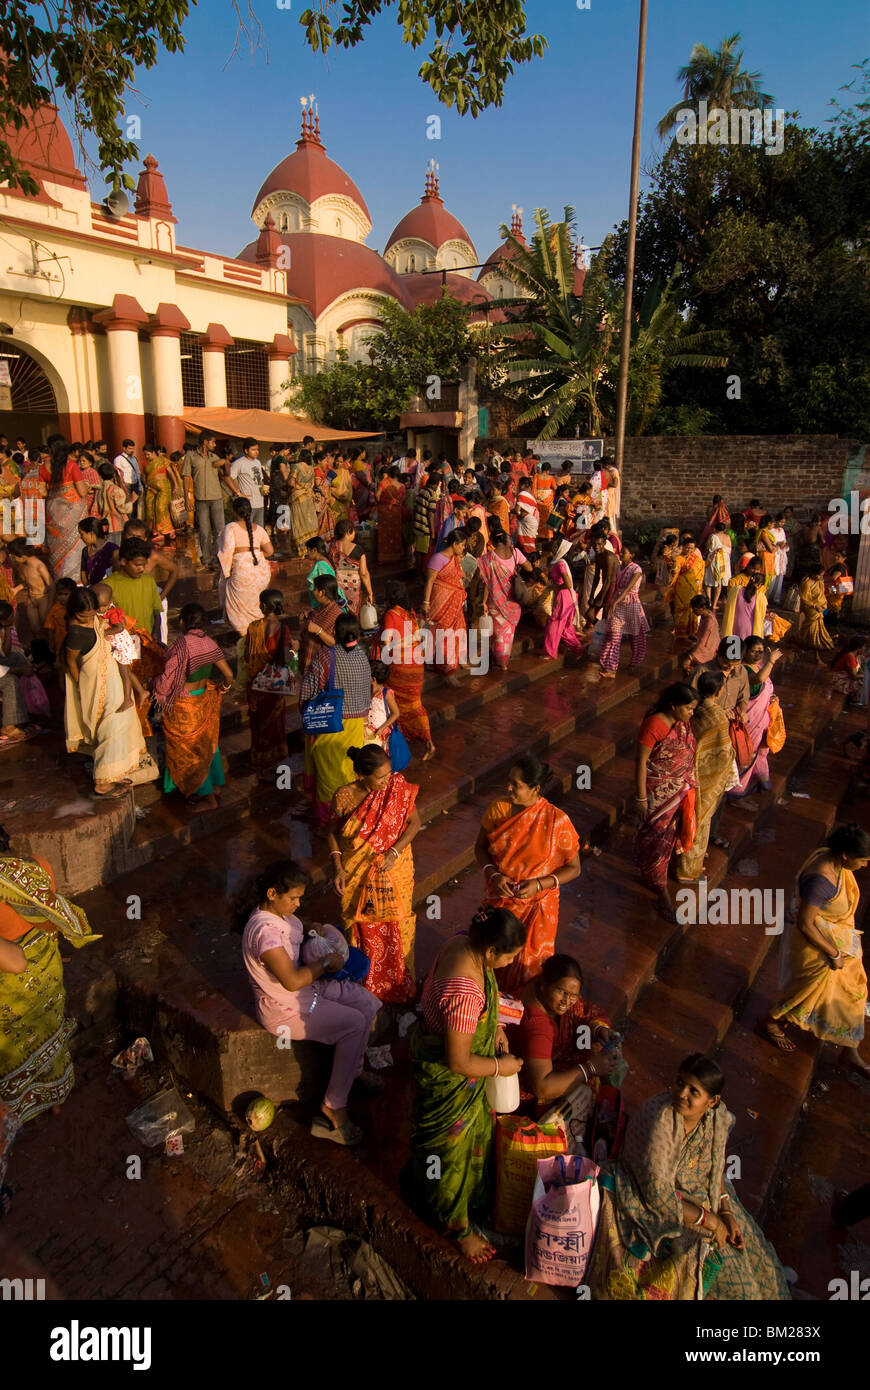 Crowds of people in front of Kali Temple, Kolkata, West Bengal, India, Asia Stock Photo